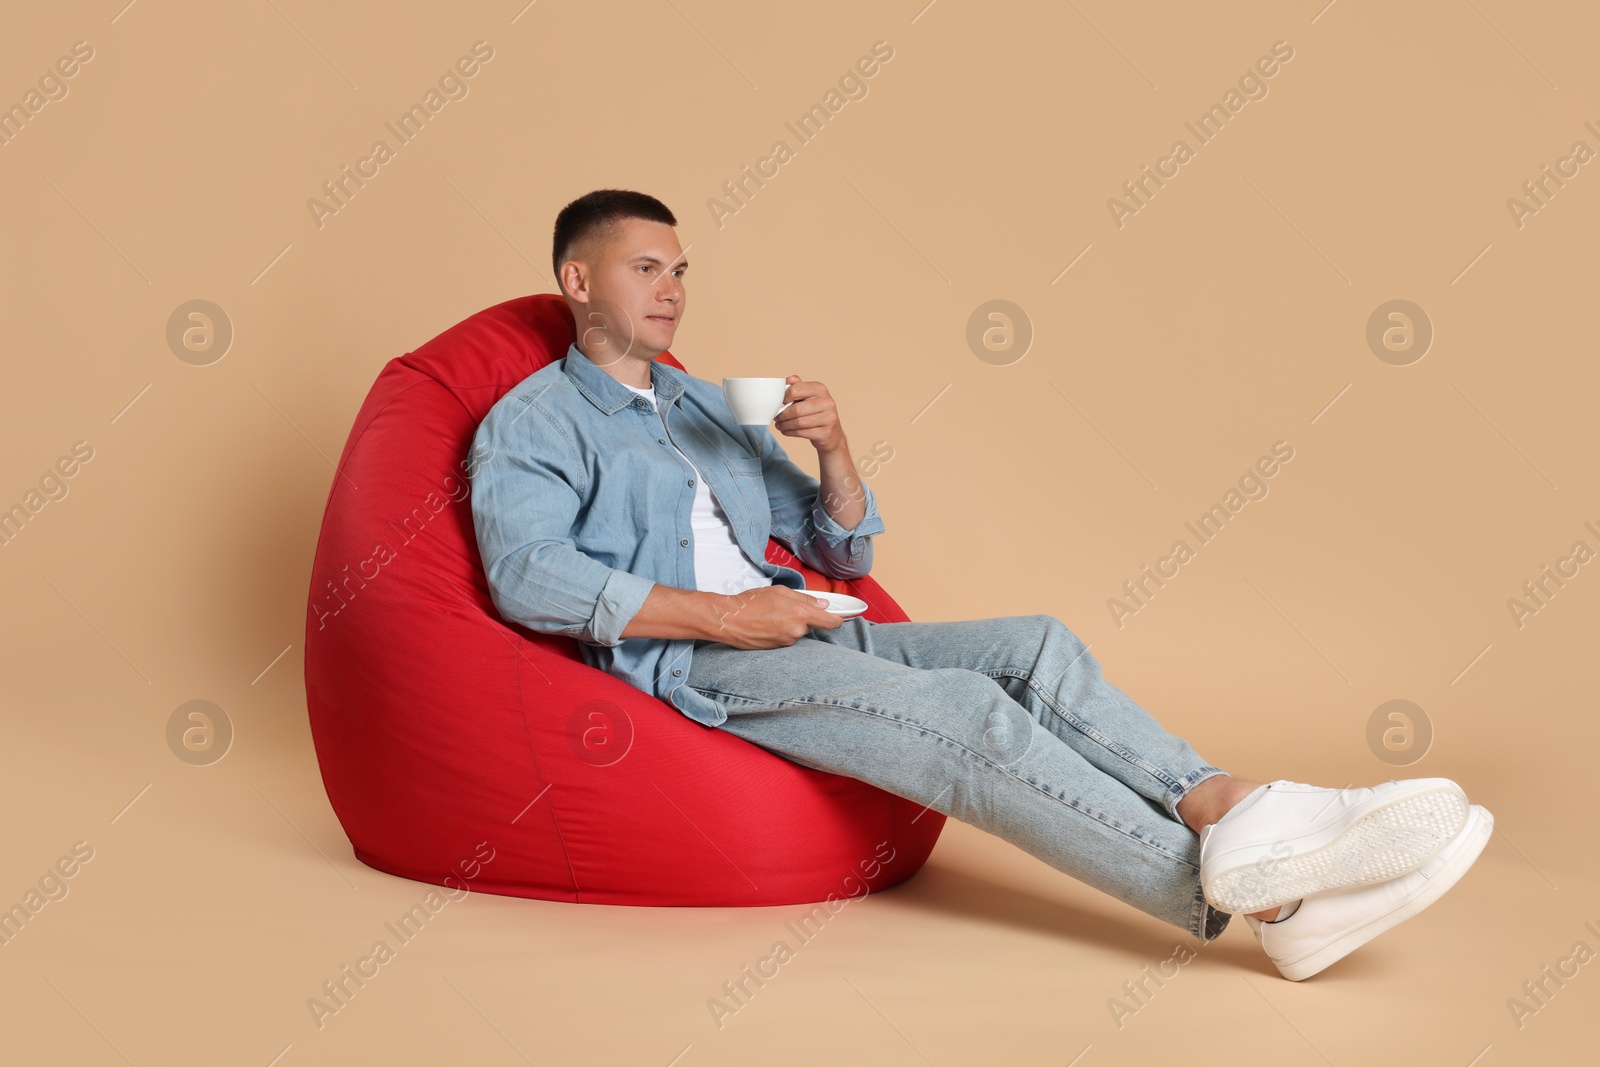 Photo of Handsome man drinking coffee on red bean bag chair against beige background